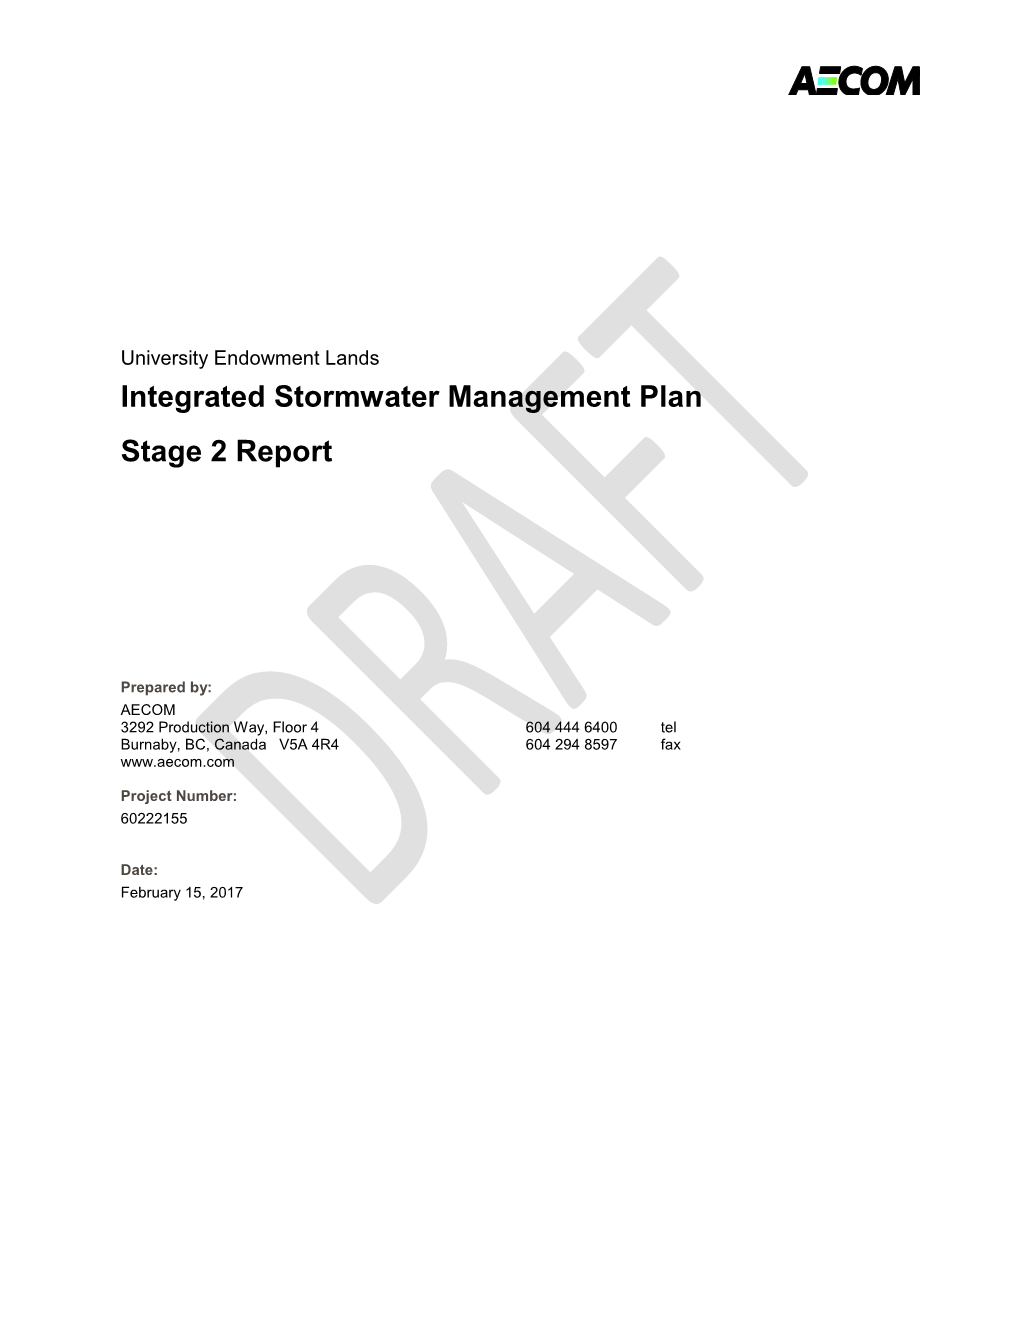 Integrated Stormwater Management Plan Stage 2 Report